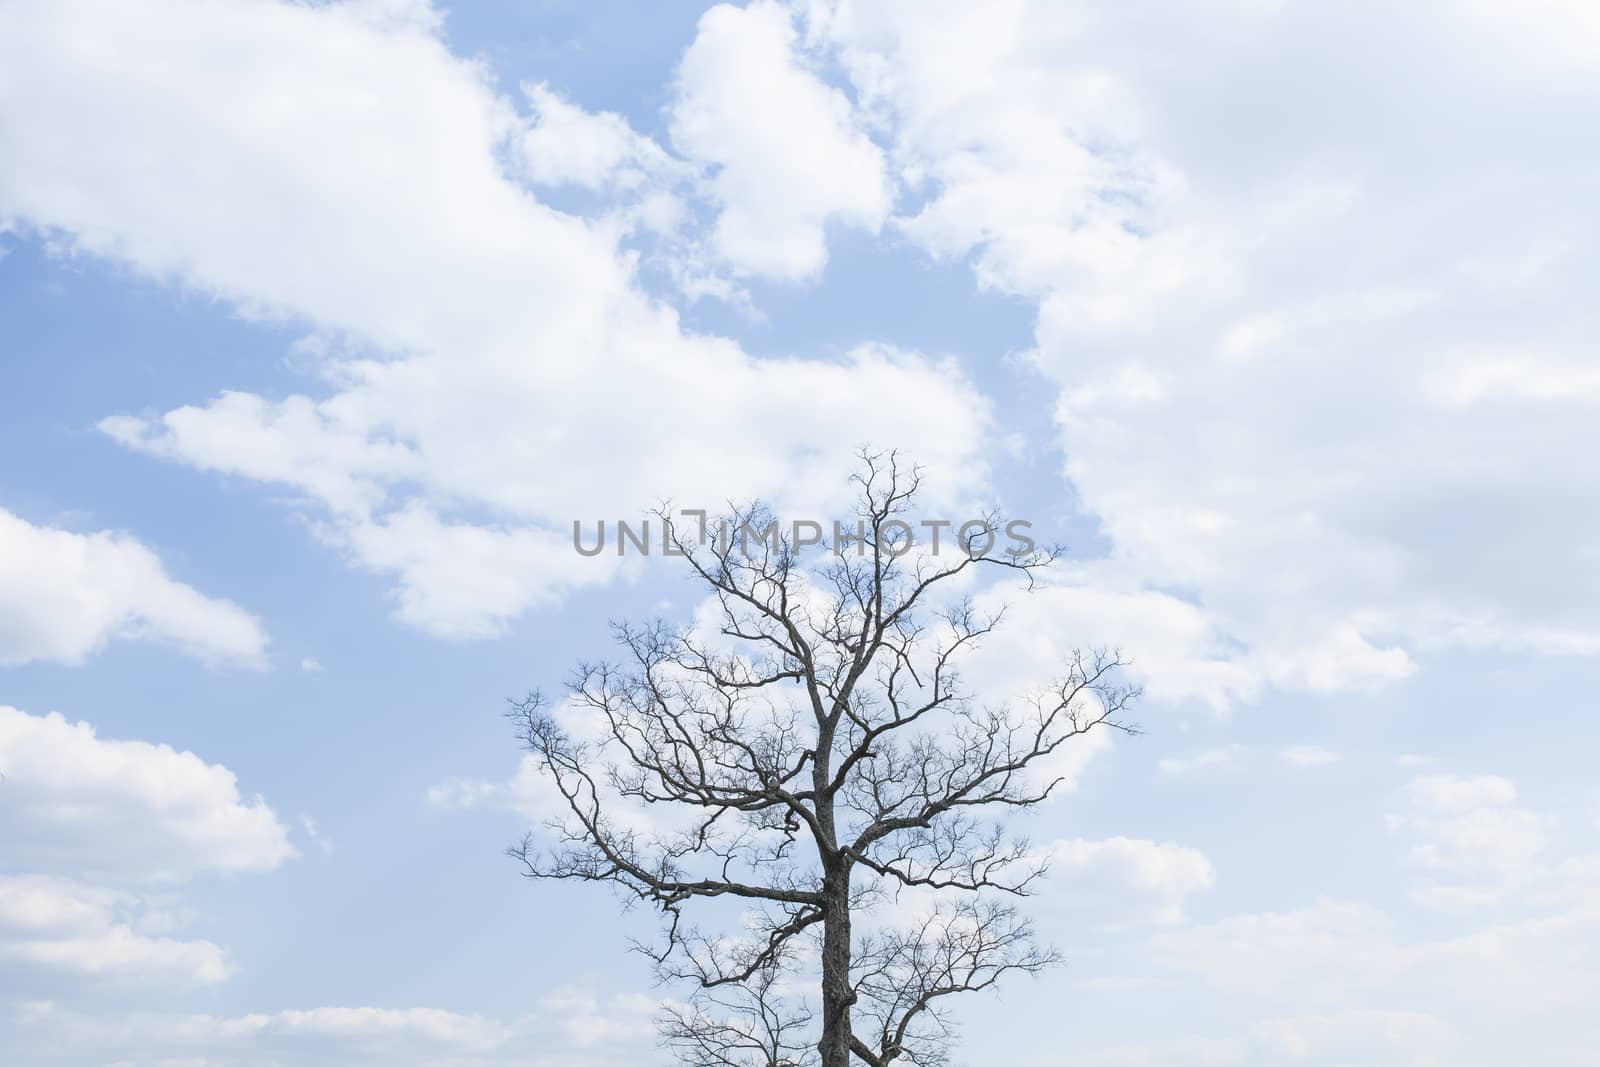 Single tree on a hill with blue sky background by kawing921